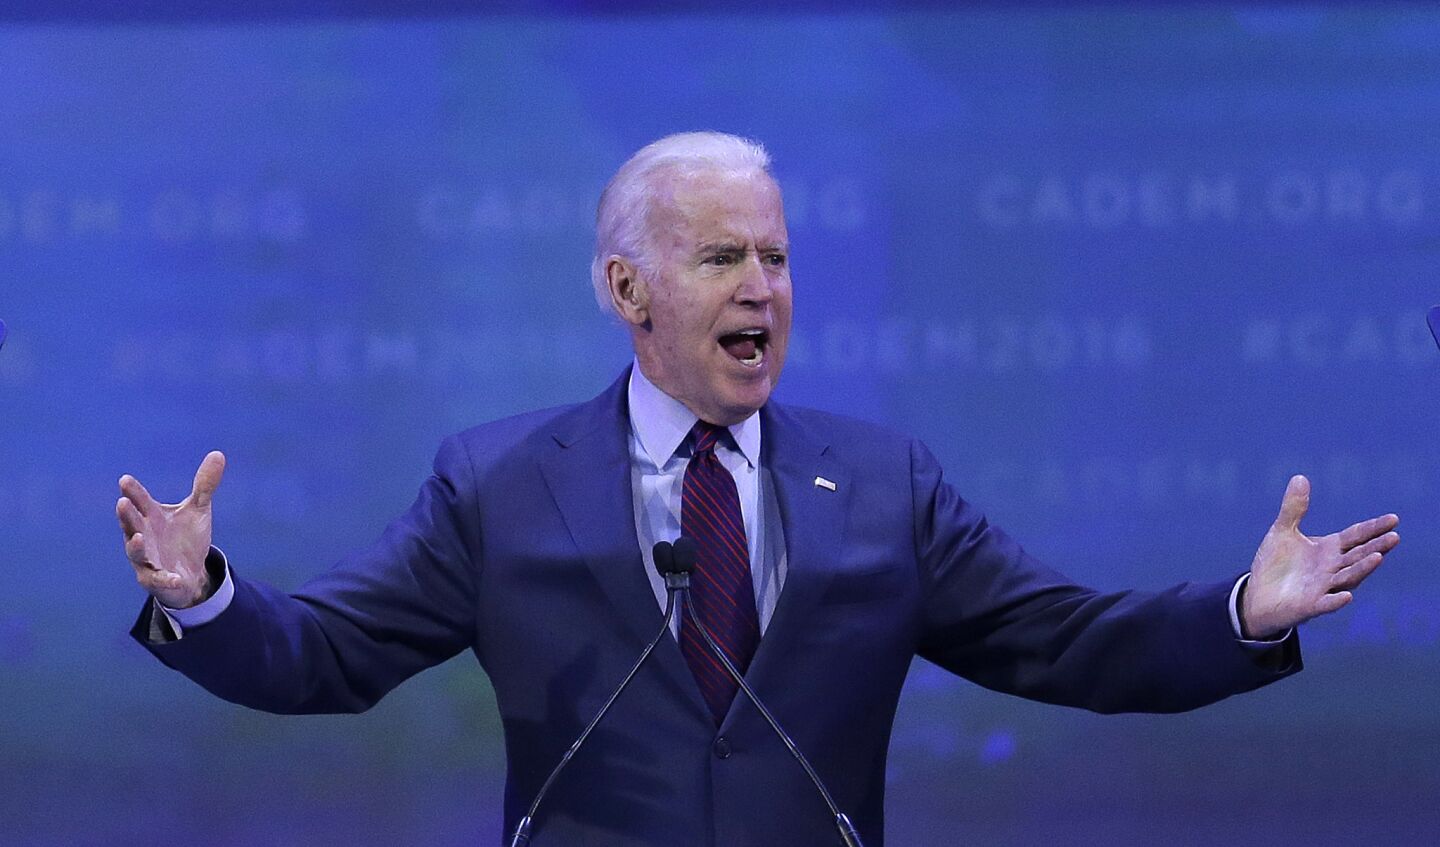 Vice President Joe Biden gives the keynote address at the California Democratic Party Convention on Saturday in San Jose.